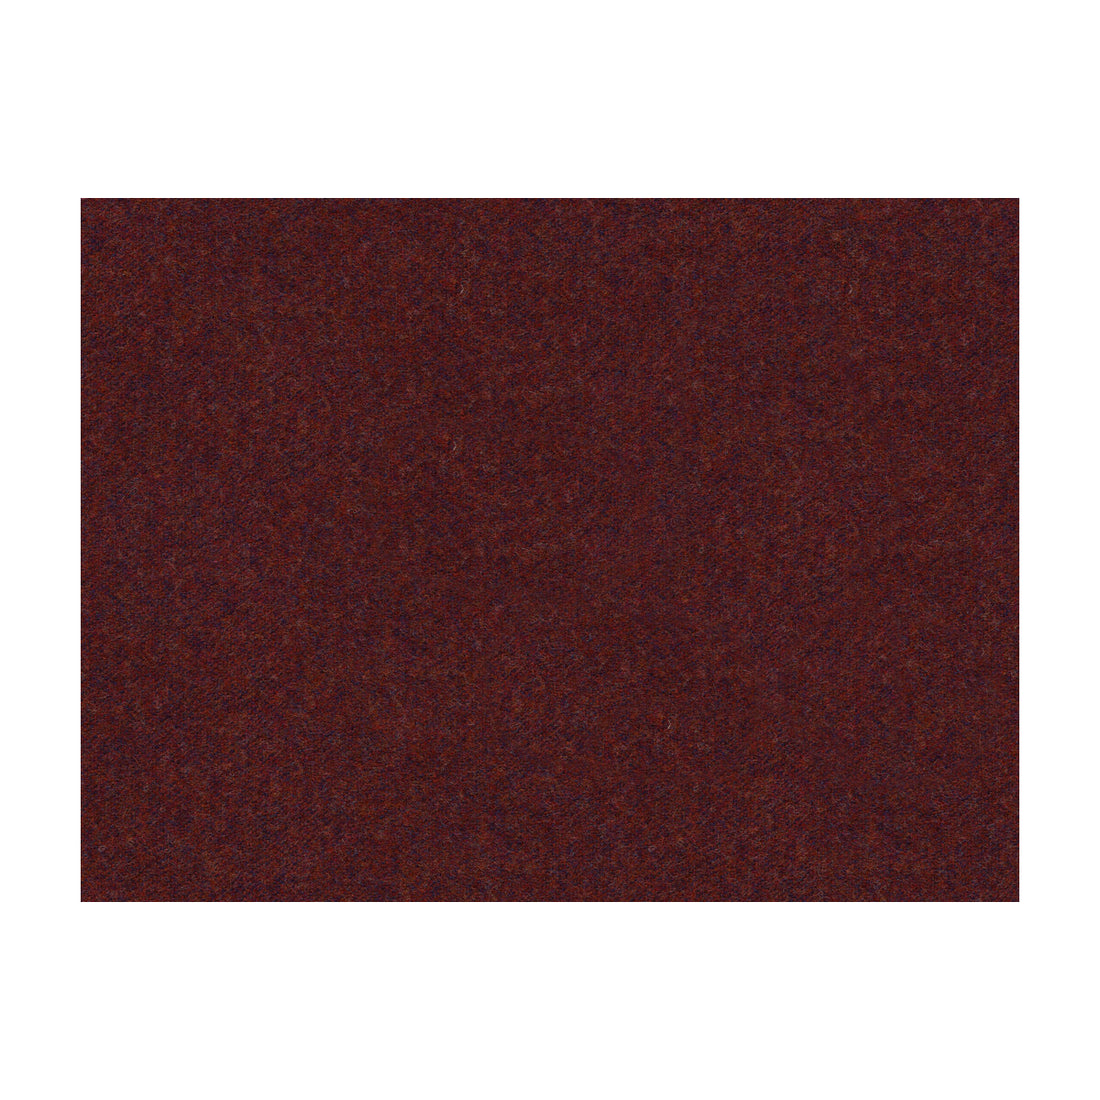 Chevalier Wool fabric in raisin color - pattern 8013149.519.0 - by Brunschwig &amp; Fils